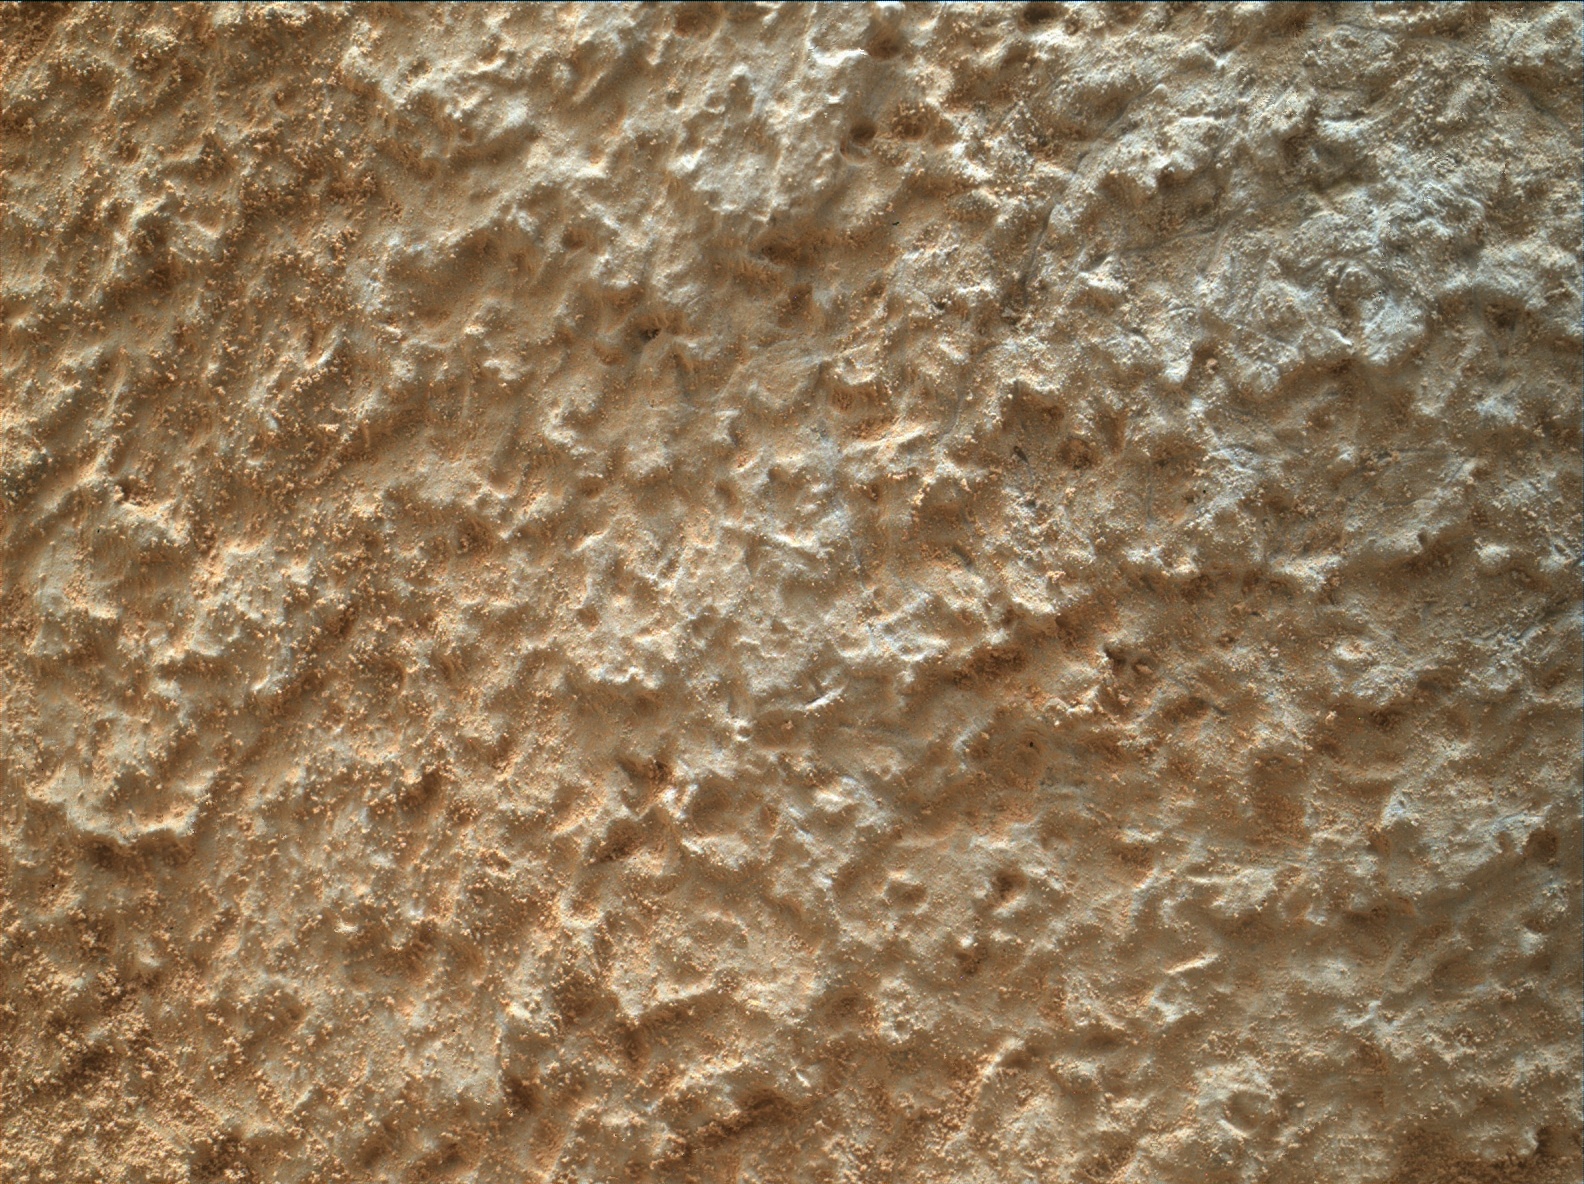 Nasa's Mars rover Curiosity acquired this image using its Mars Hand Lens Imager (MAHLI) on Sol 824